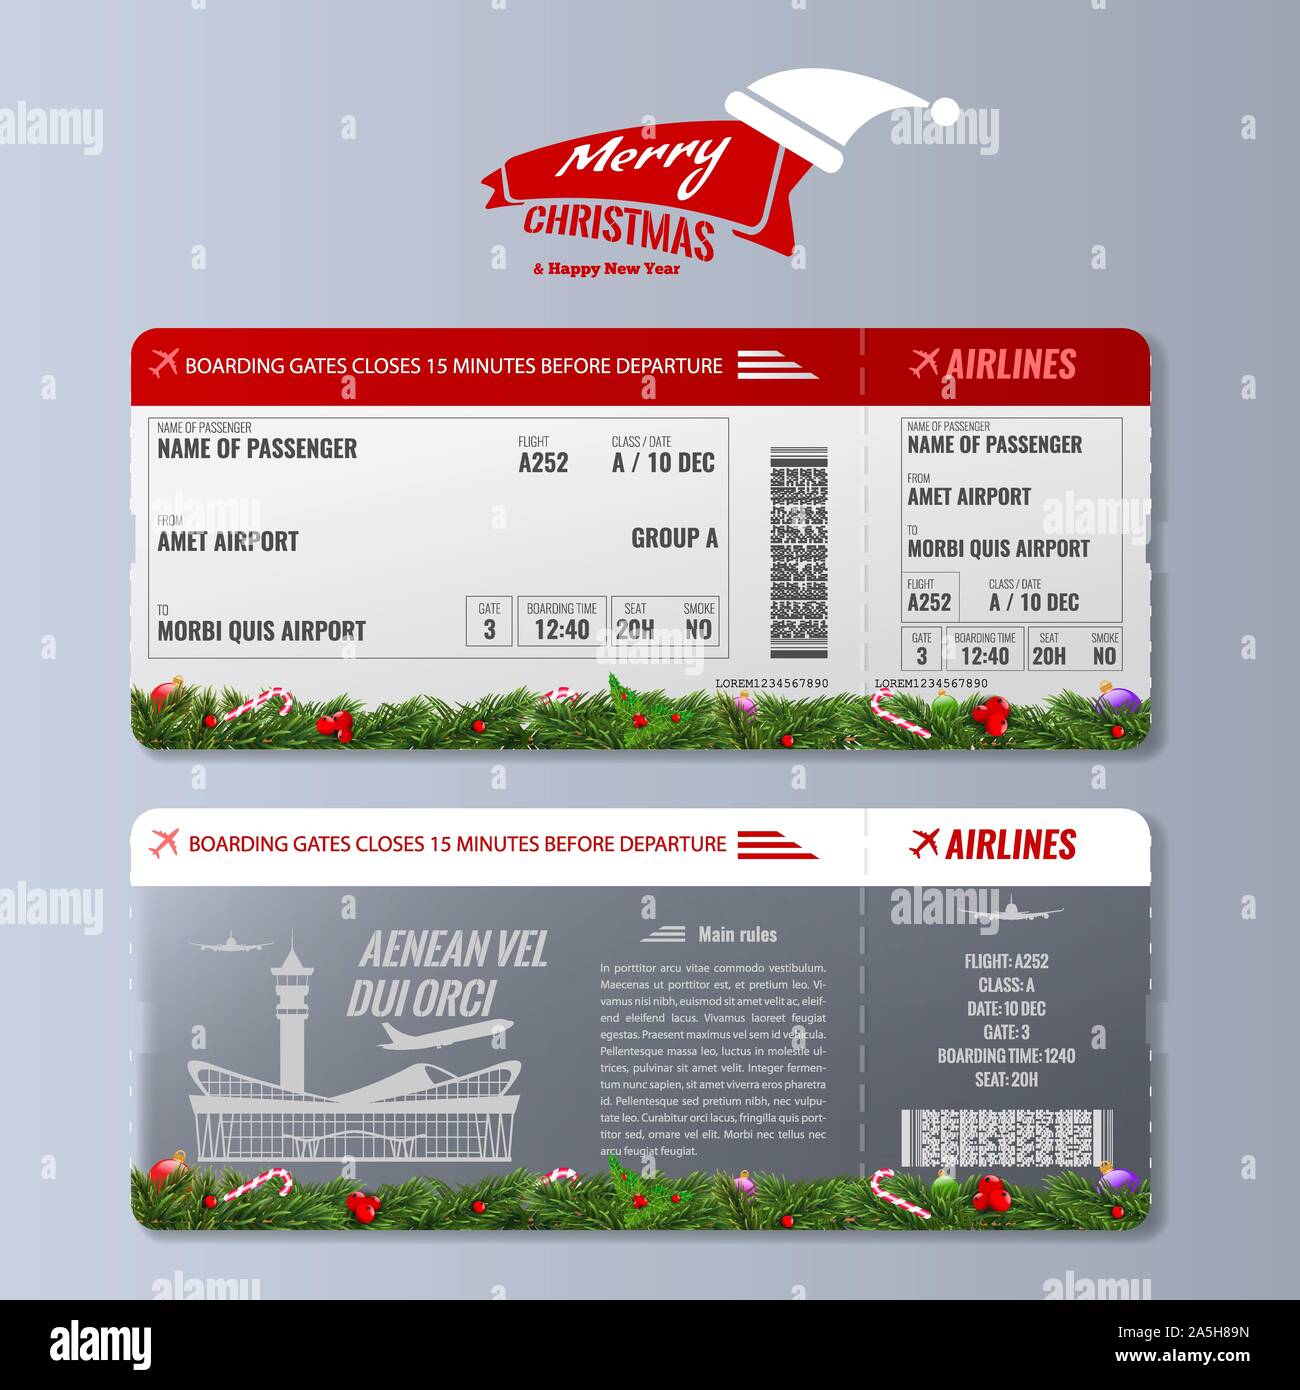 Airline boarding pass or air ticket design template with christmas or new year holiday concept. Vector illustration. Stock Vector